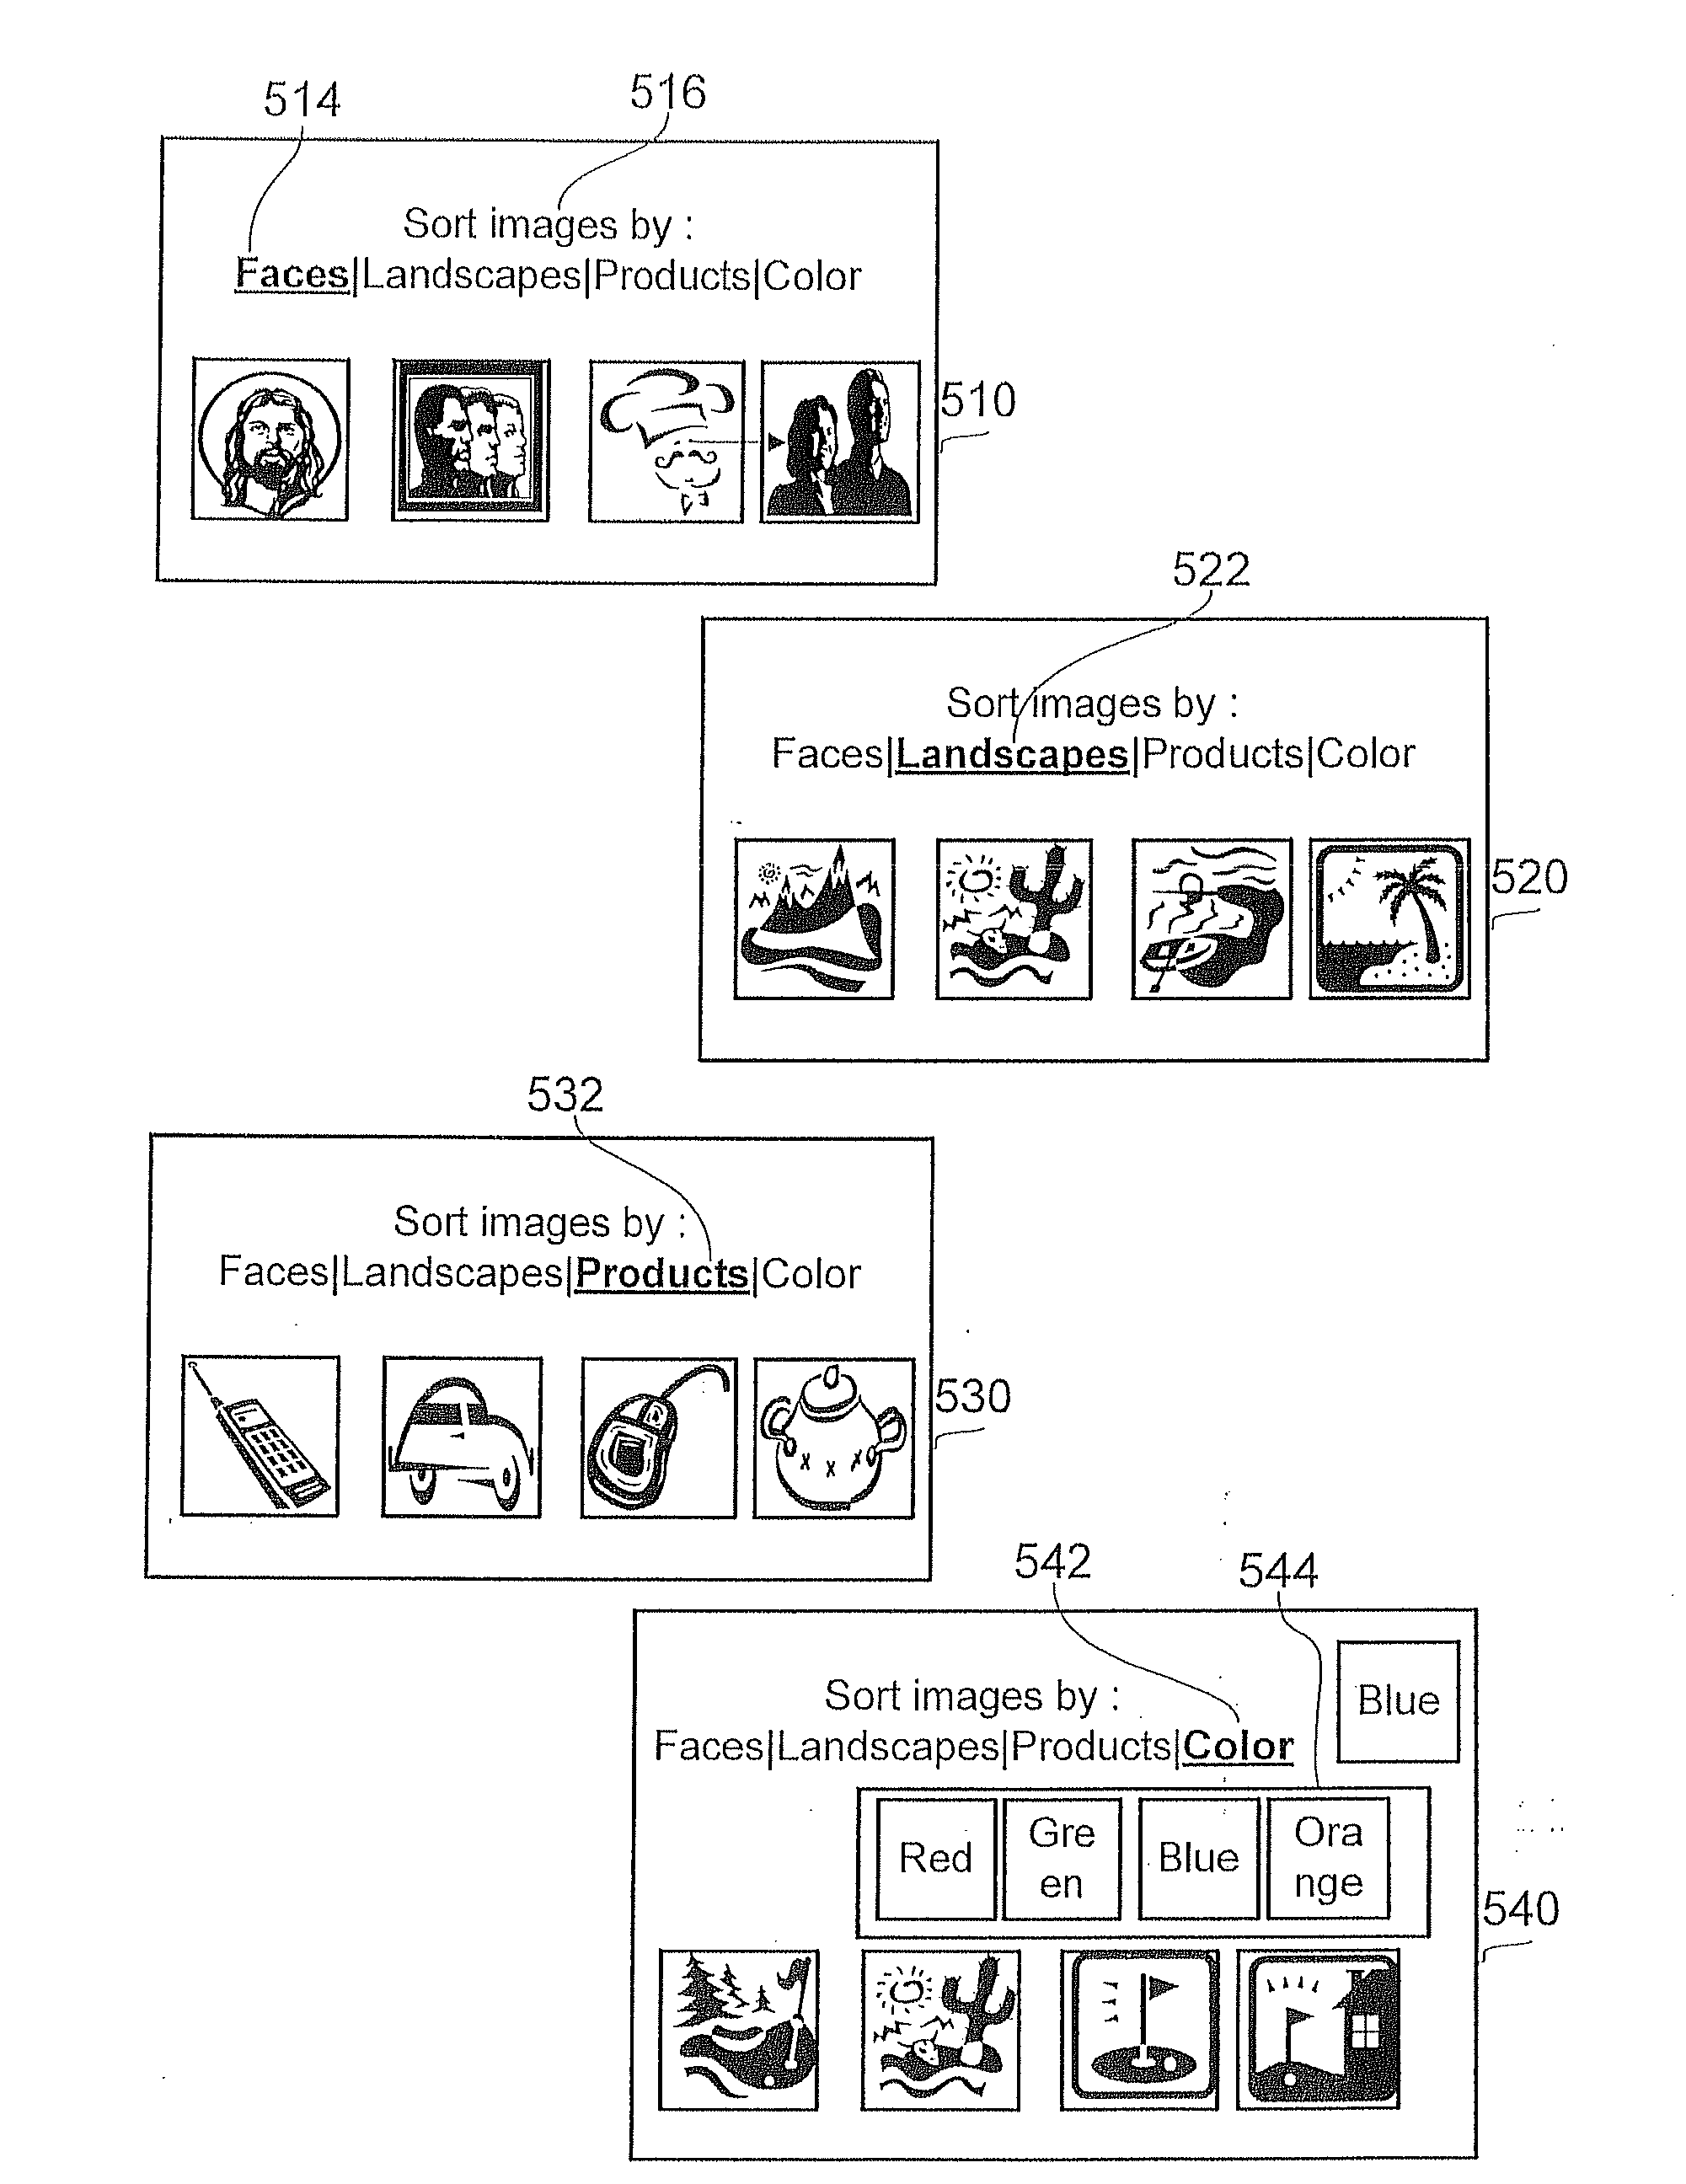 Object search and navigation method and system